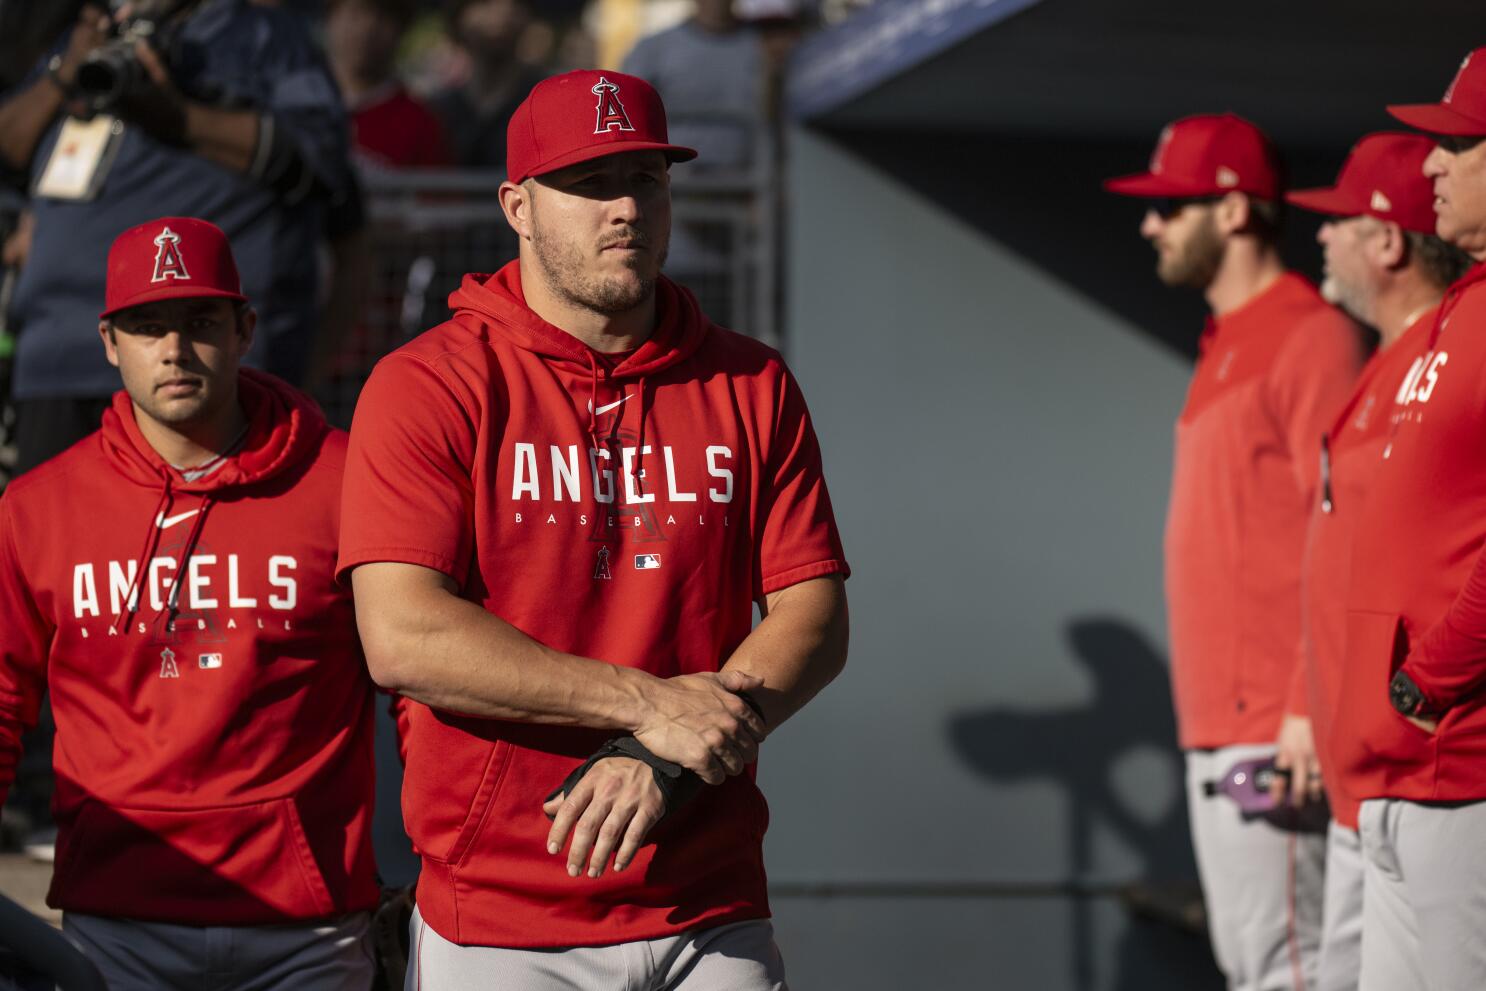 Angels star Mike Trout's MLB All-Star Game replacement after